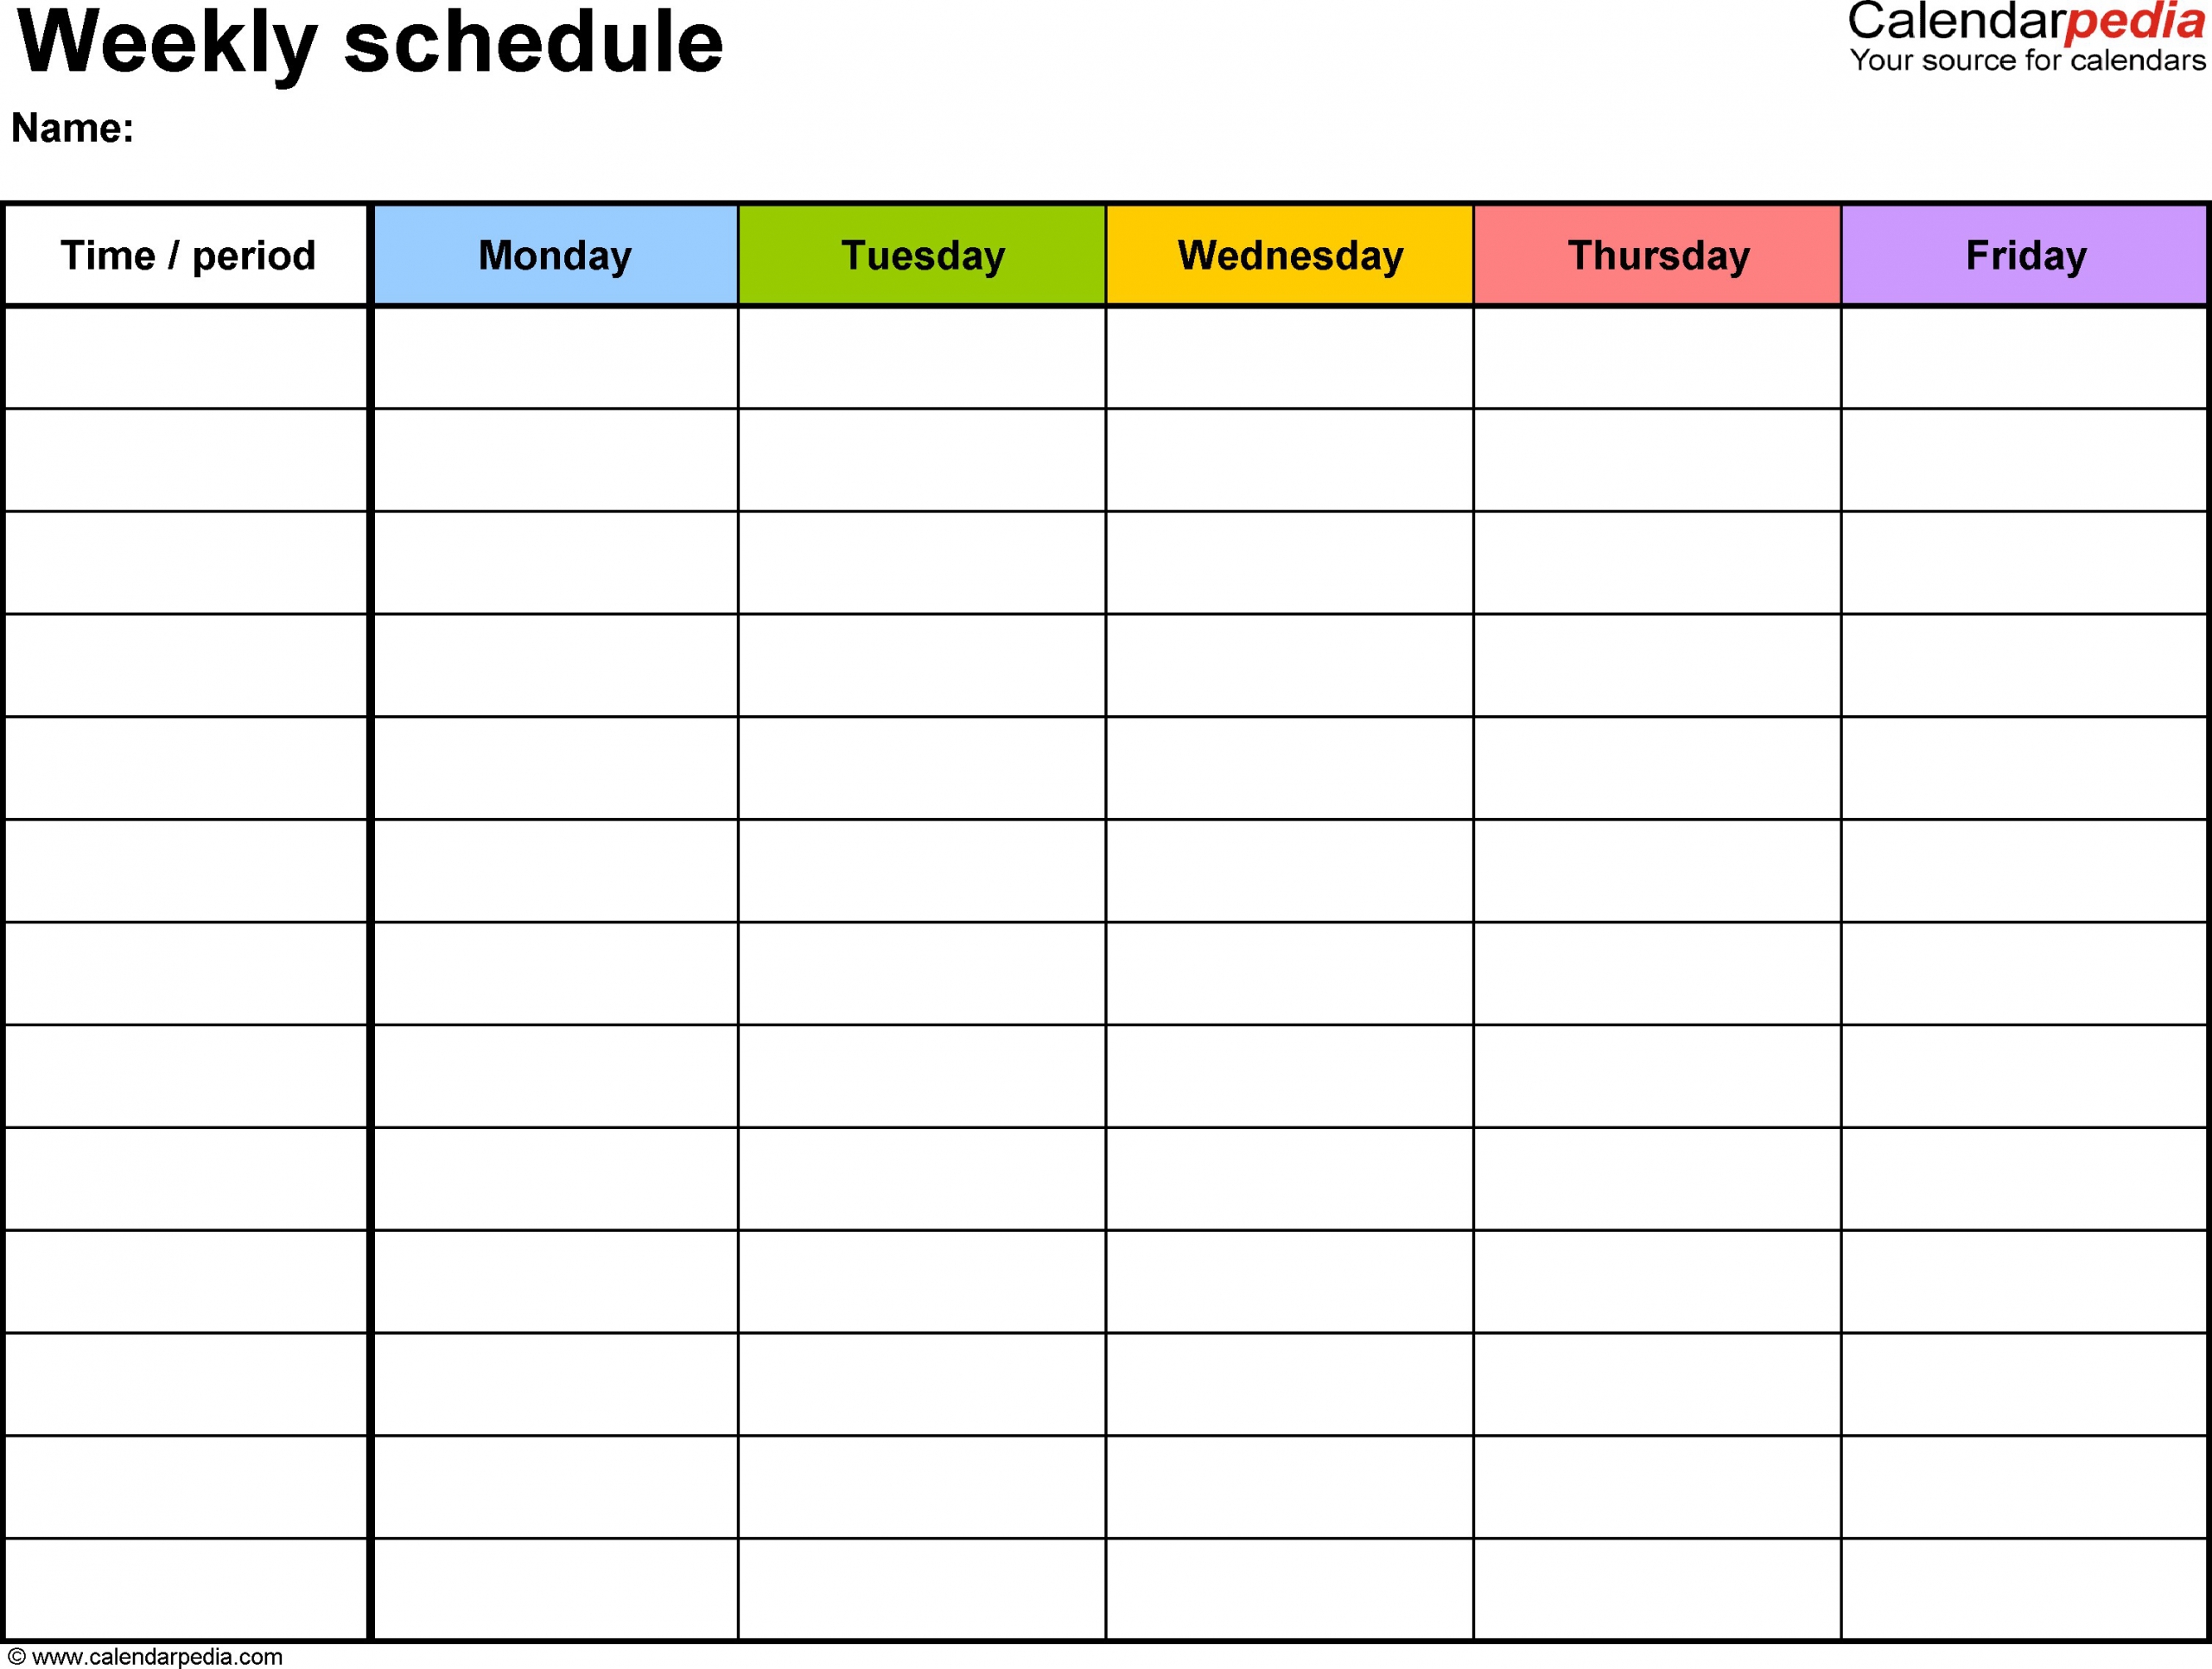 Monday Friday Calendar In 2020 | Daily Schedule Template